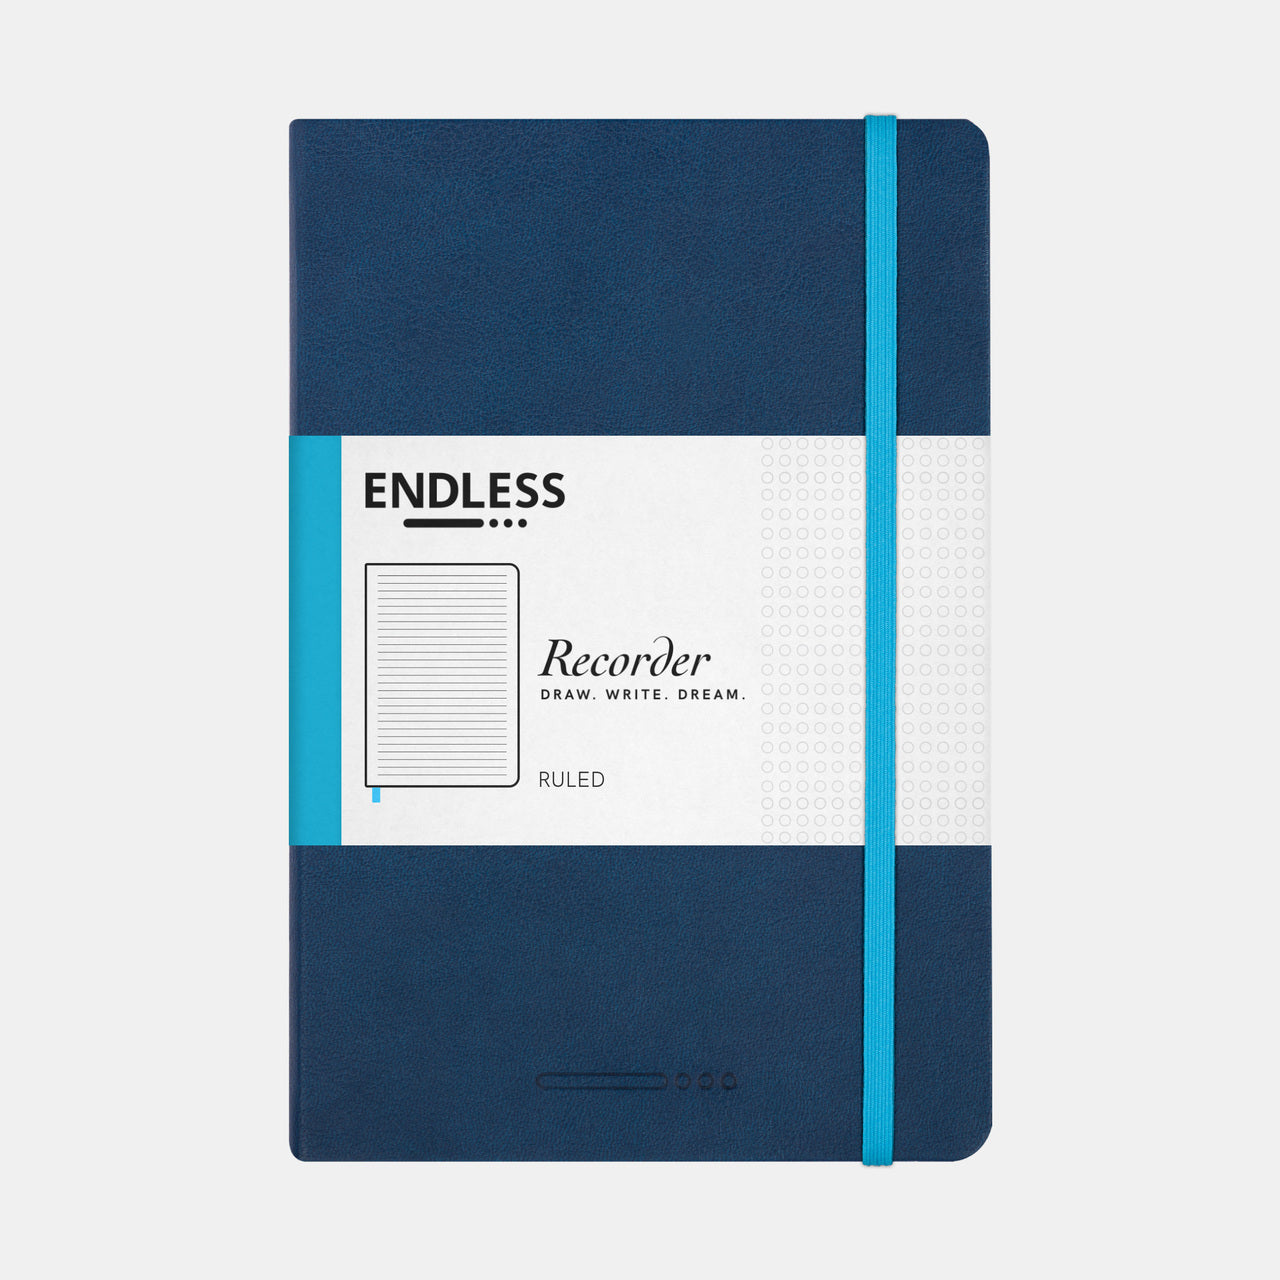 Endless Recorder A5 Journal- Blue Cover. 